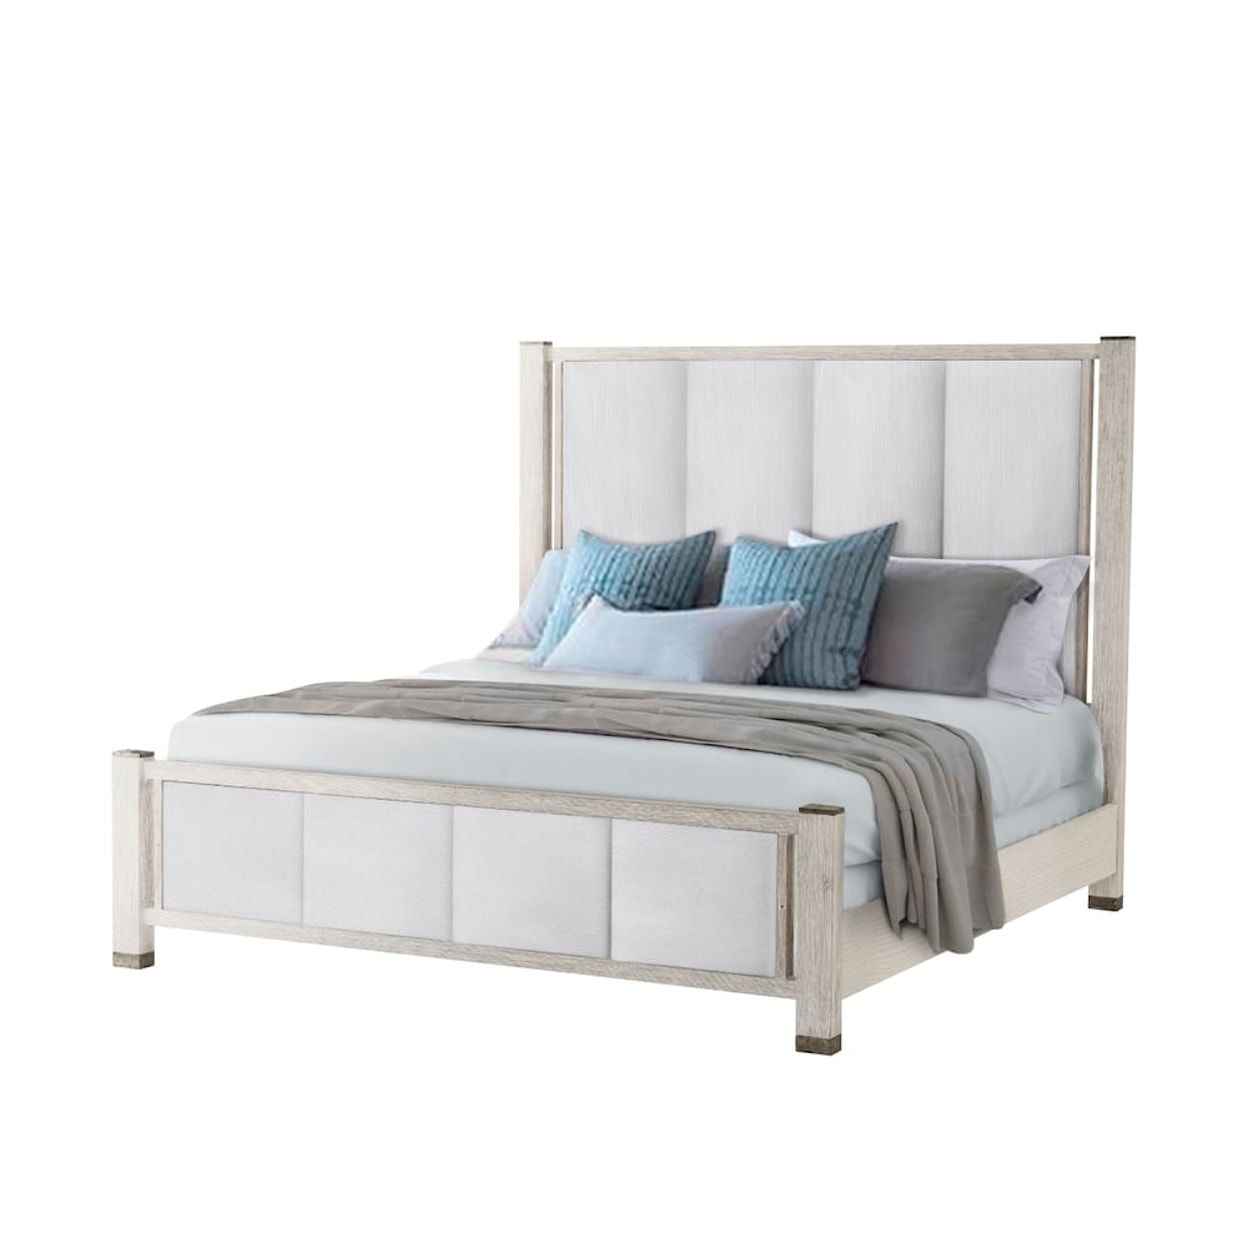 Theodore Alexander Breeze Upholstered King Bed